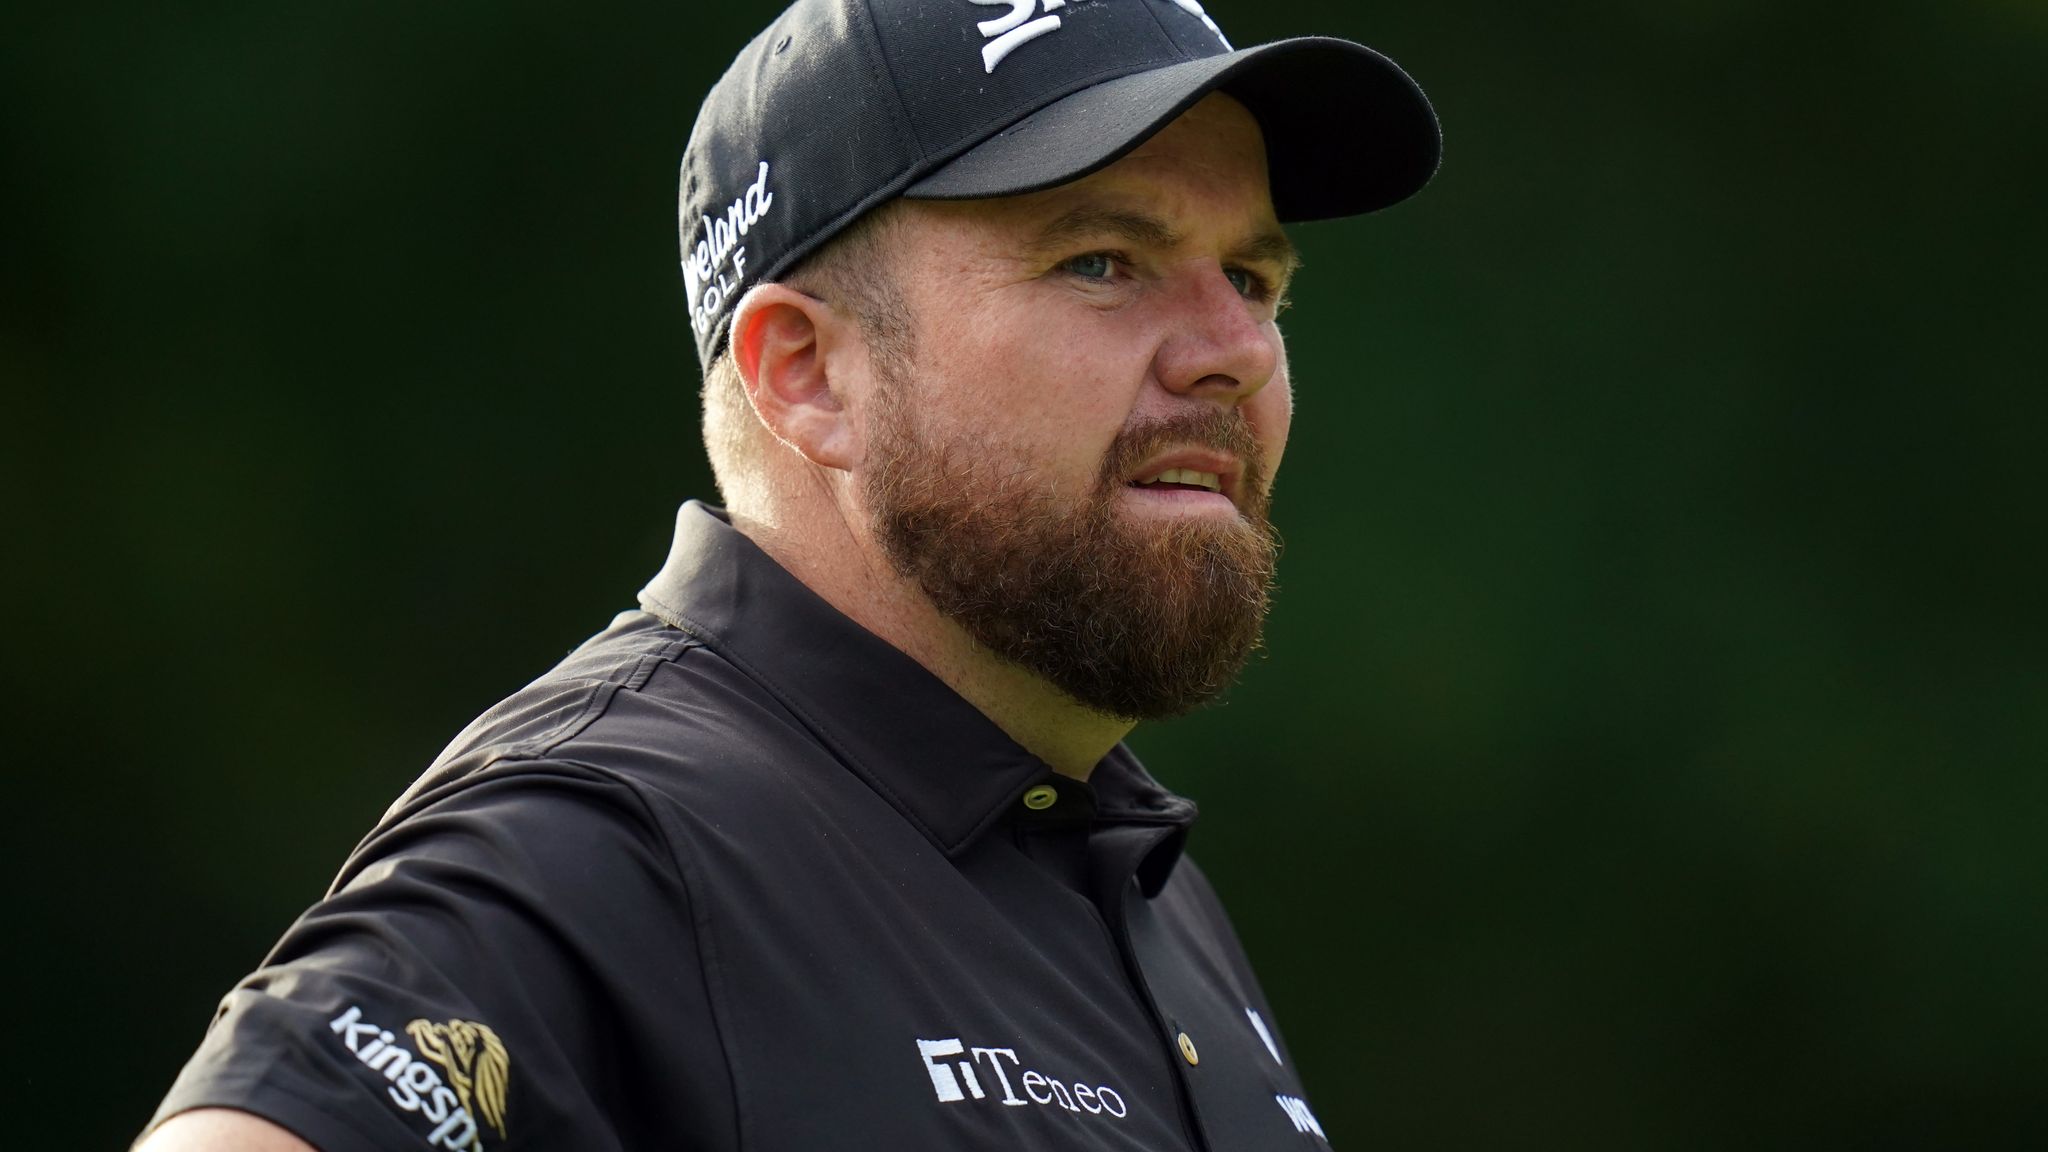 Shane Lowry says disgusting amounts of money in golf could alienate fans as he hits out at LIV Golf tour Golf News Sky Sports